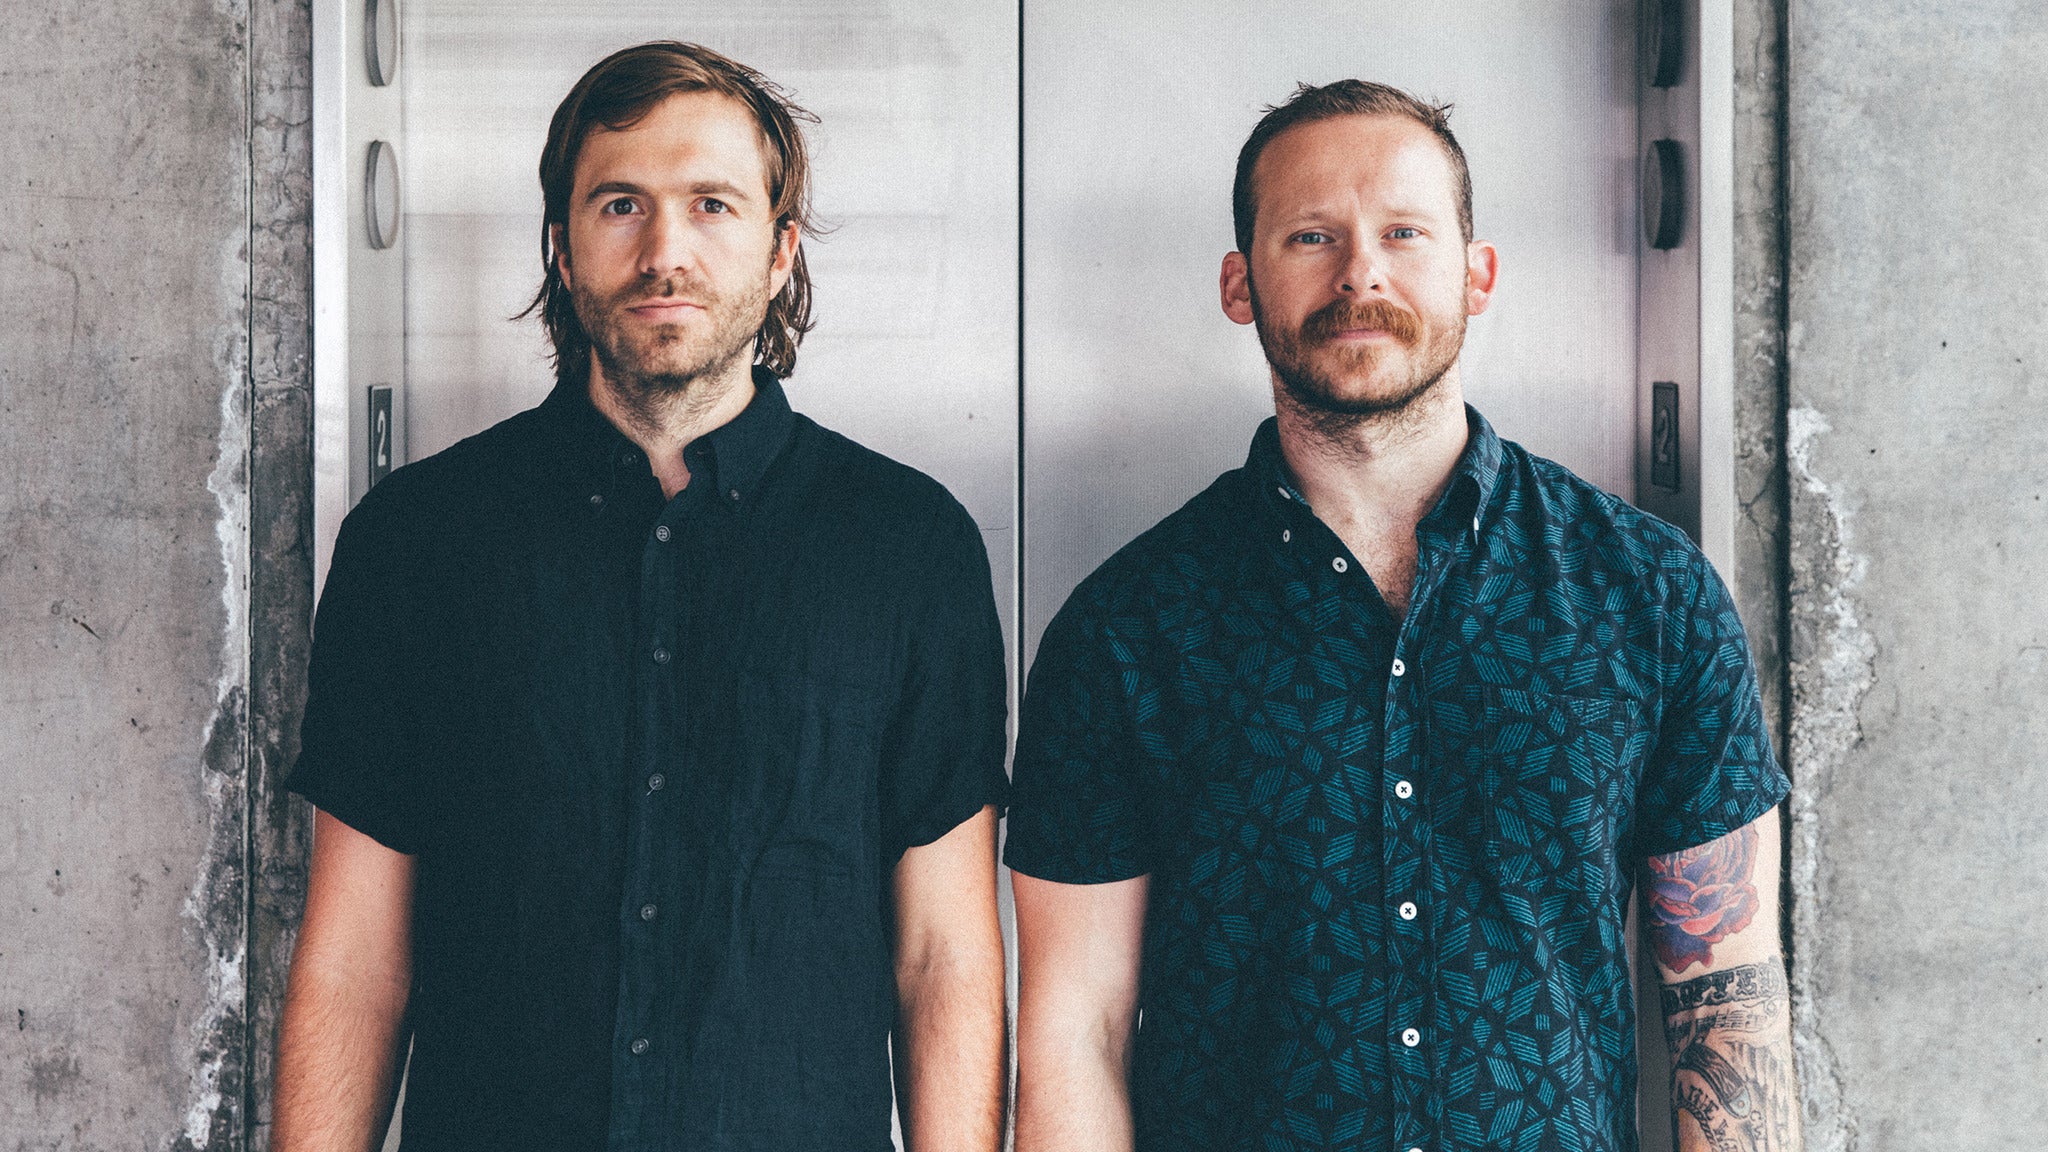 Penny & Sparrow in Chattanooga promo photo for Venue Online presale offer code